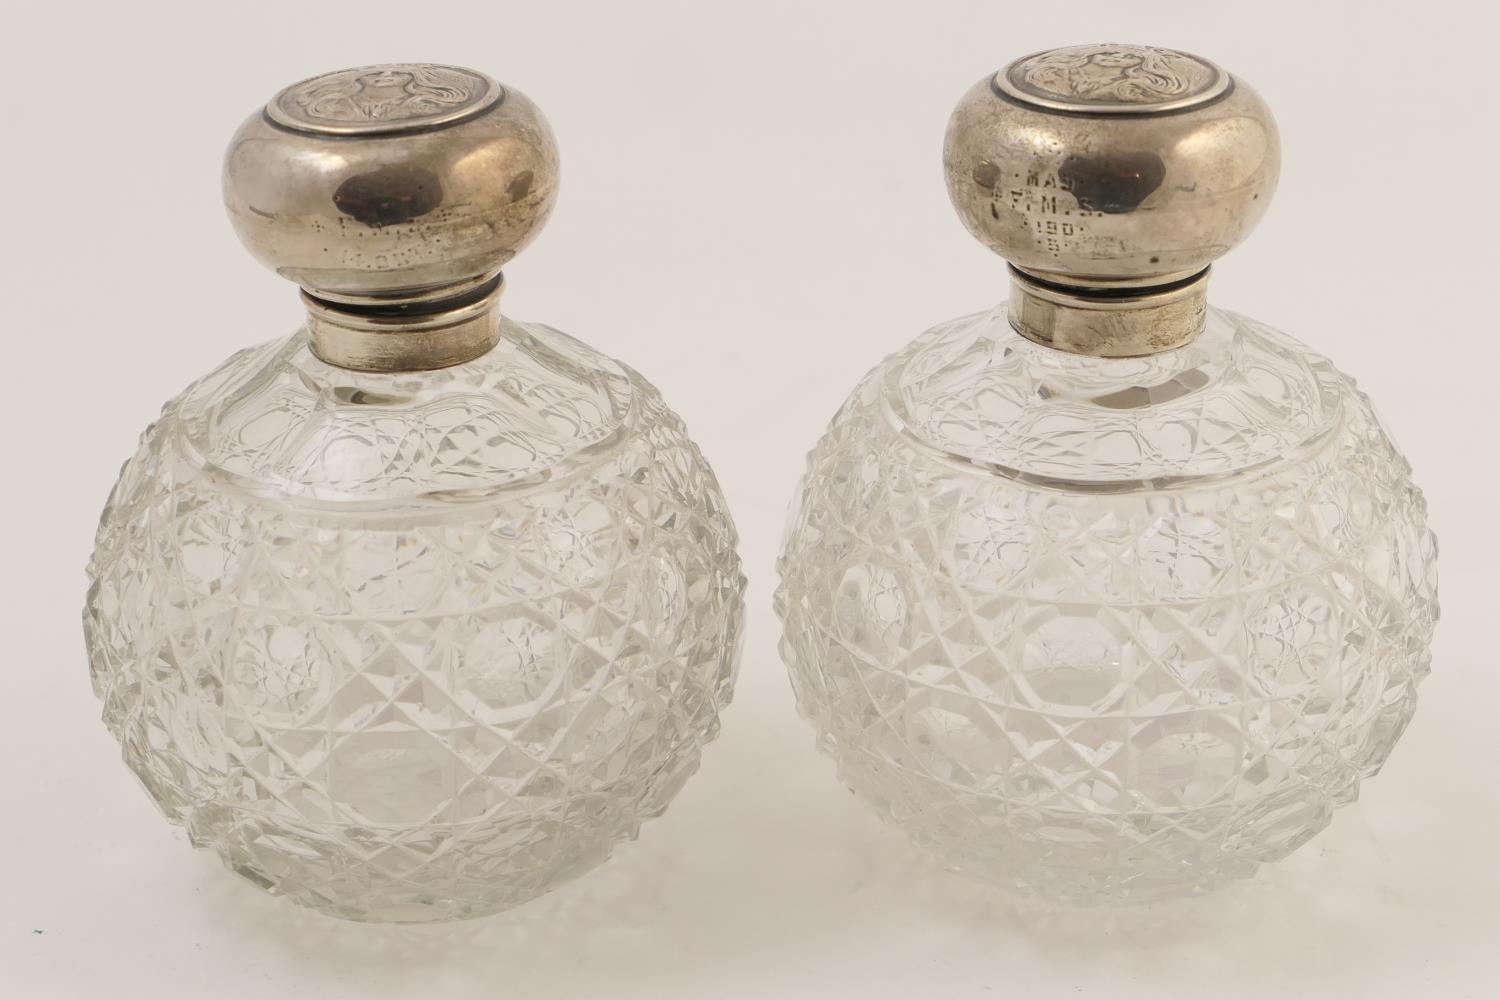 Pair of Edwardian silver mounted cut glass scent bottles, Chester 1903, en suite to the previous